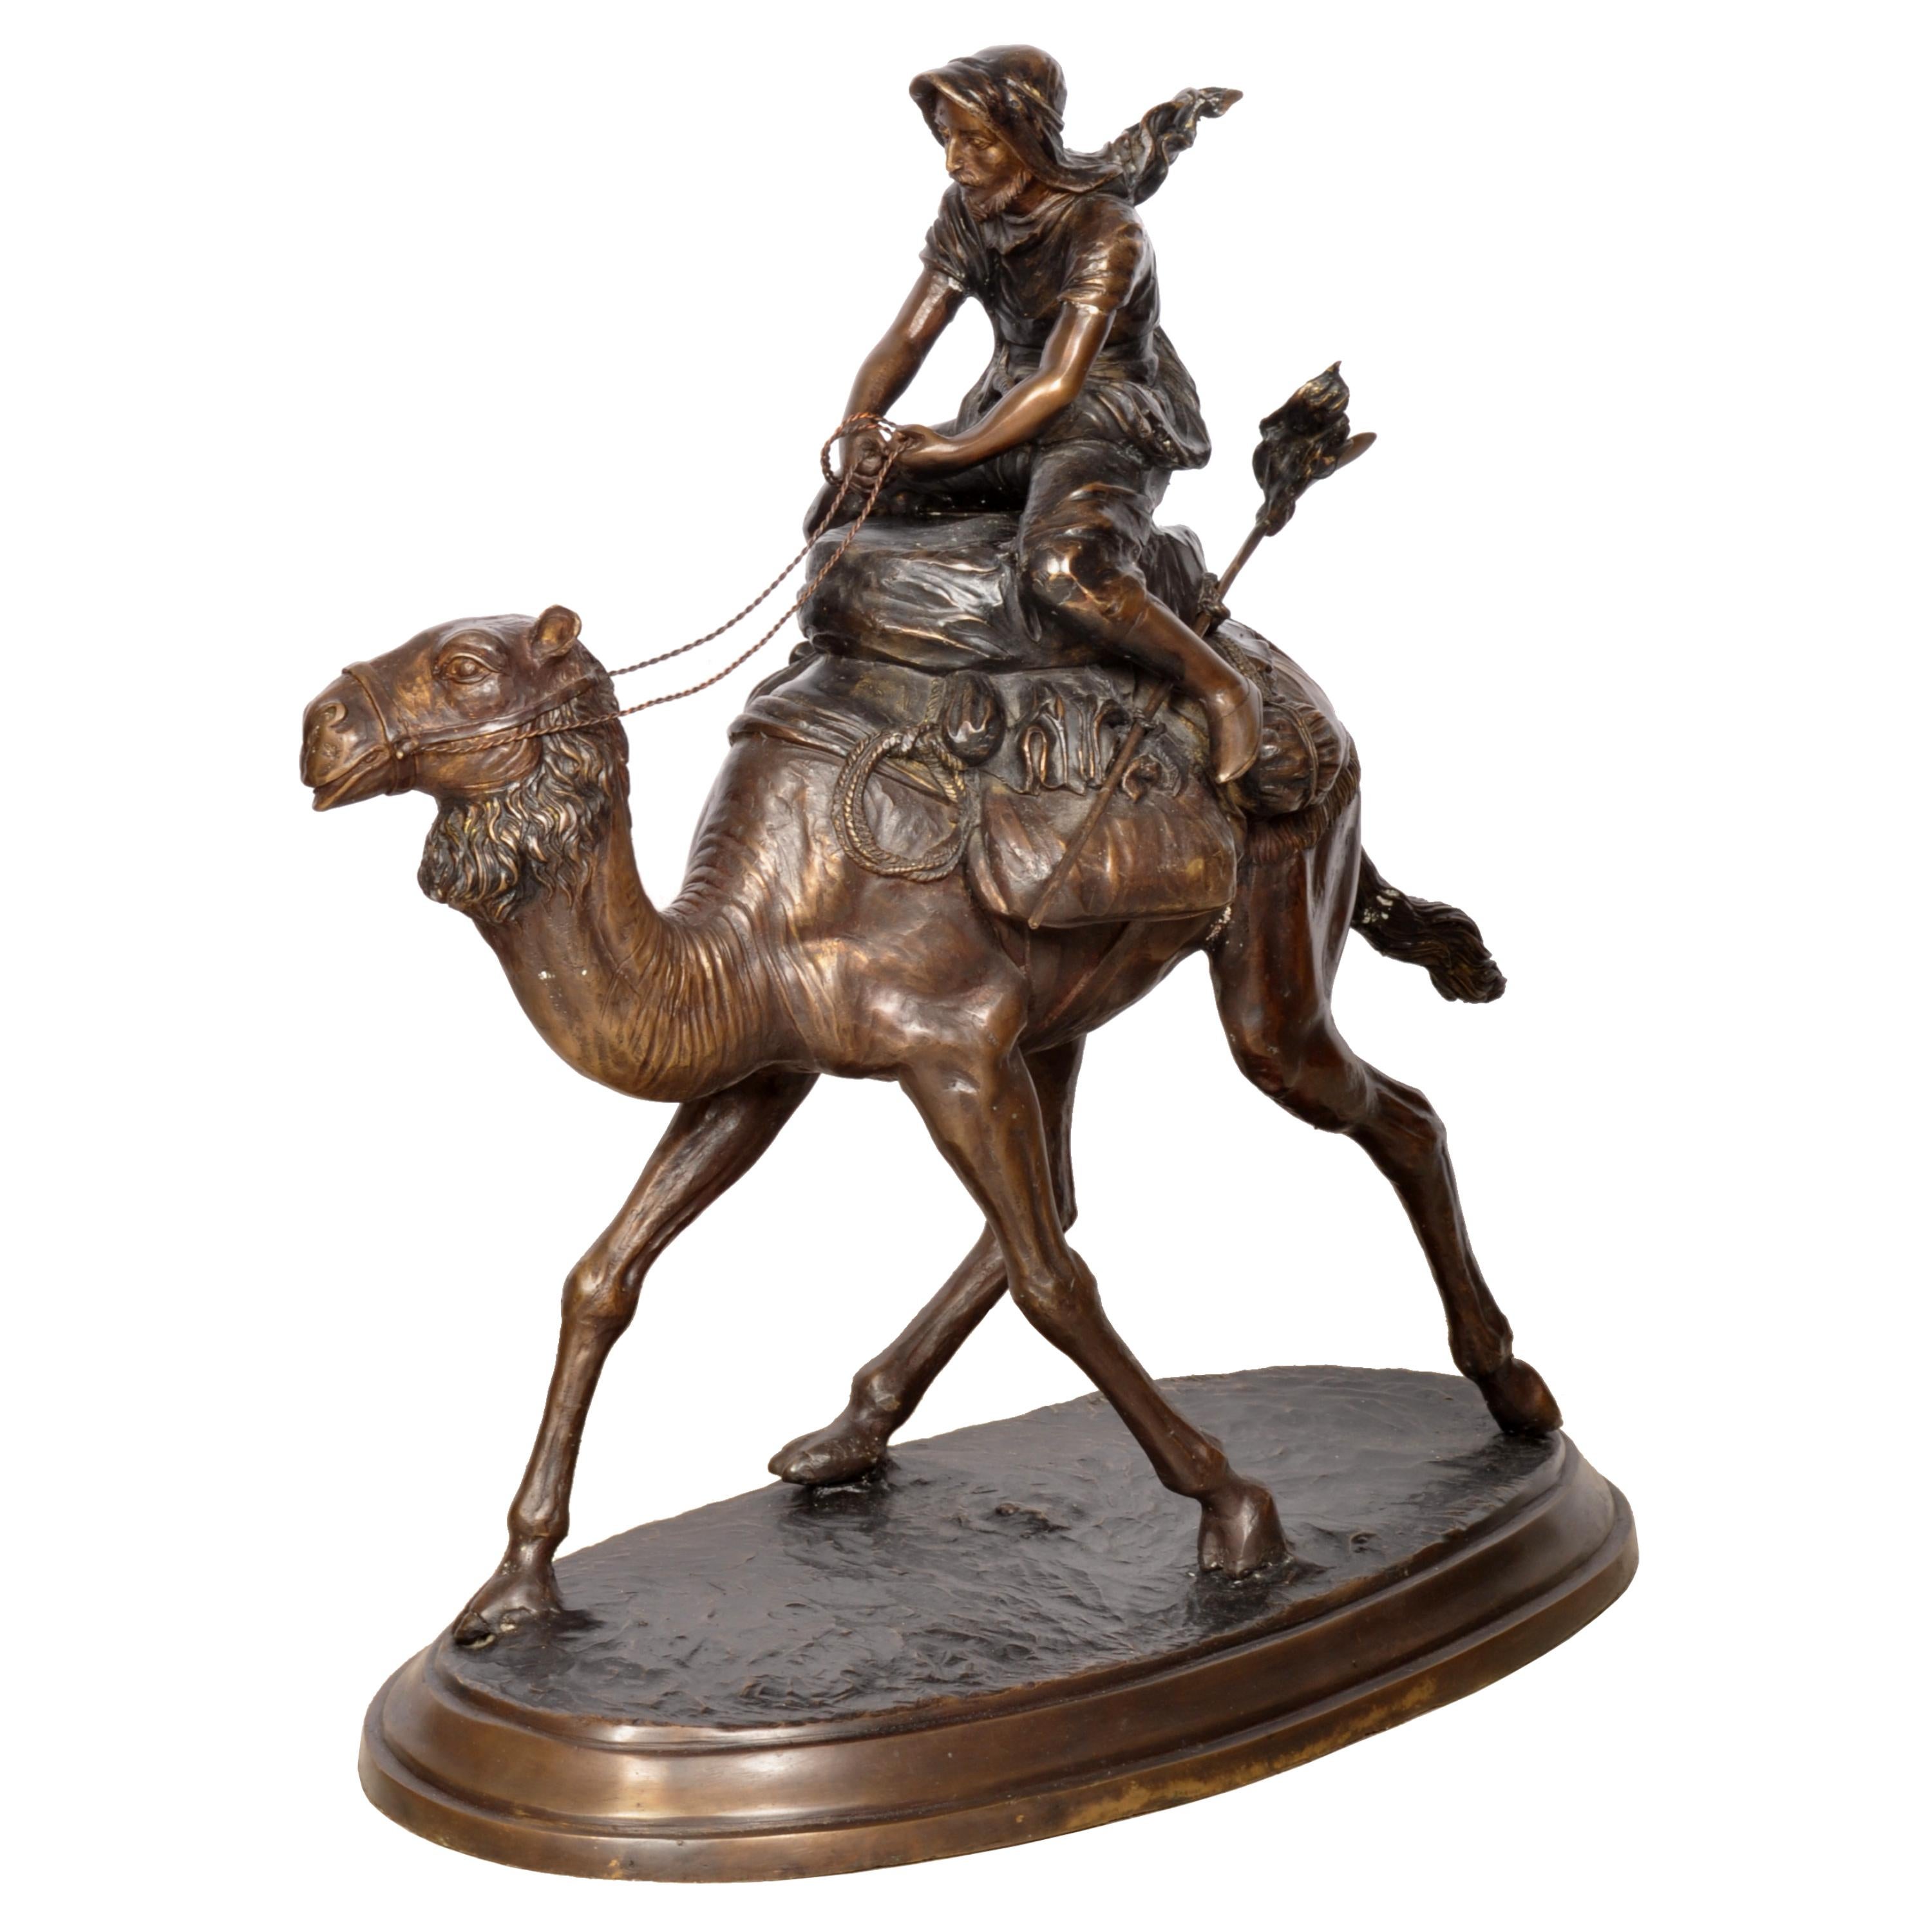 A large cast Vienna bronze in the Orientalist style by the Austrian sculptor Carl Kauba (1865-1922).
The bronze finely modeled as an Arabian dromedary camel with a rider astride, possibly representing T. E. Lawrence ( Lawrence of Arabia). 
The